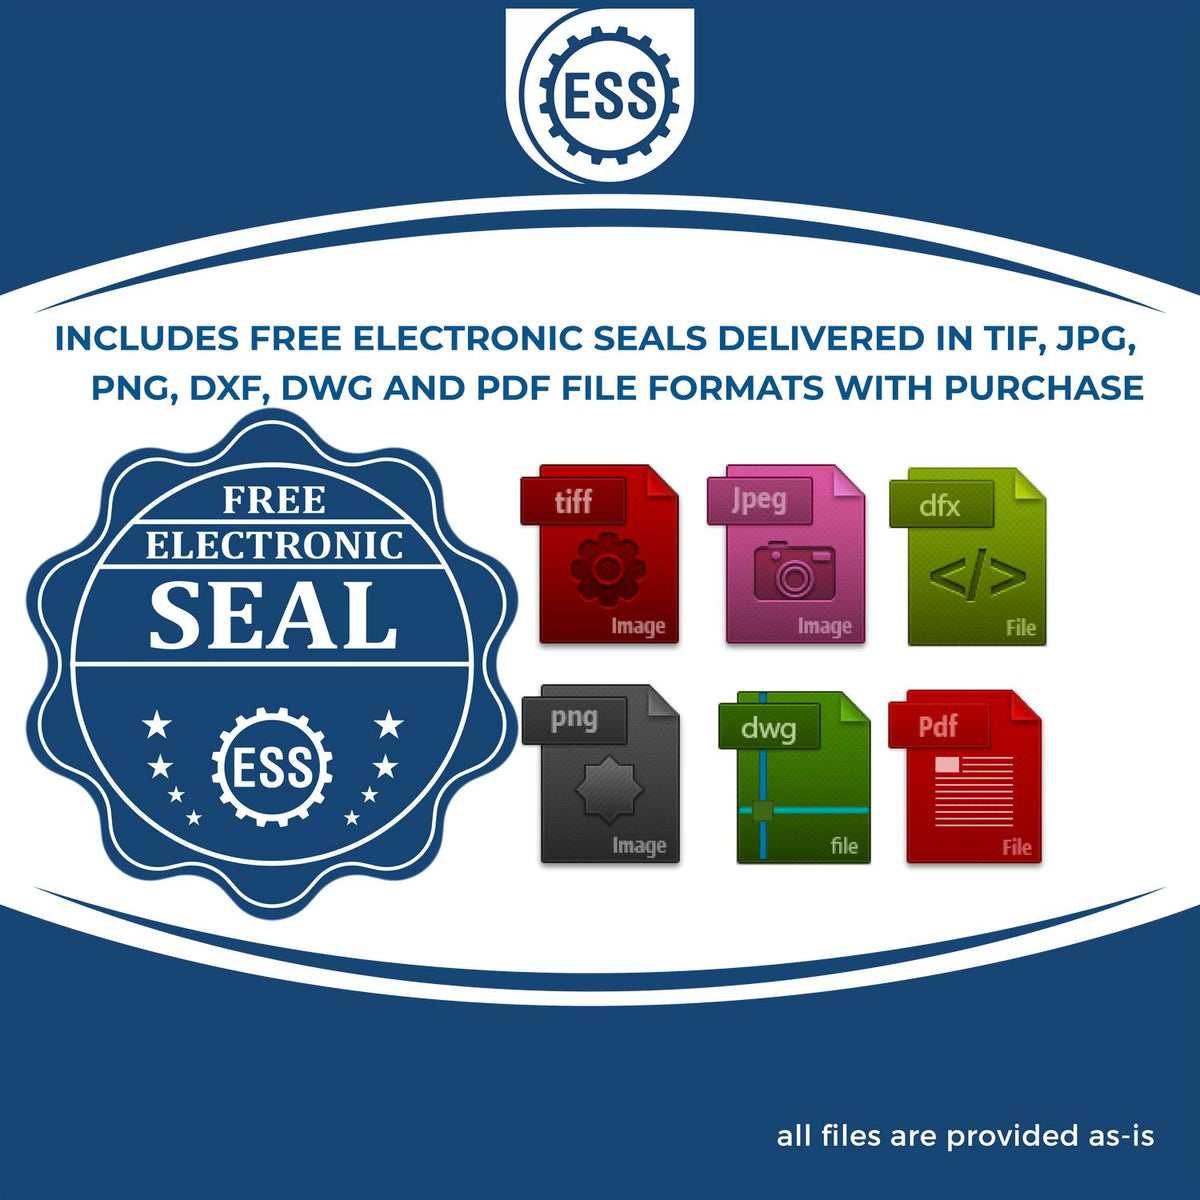 An infographic for the free electronic seal for the Soft North Dakota Professional Engineer Seal illustrating the different file type icons such as DXF, DWG, TIF, JPG and PNG.